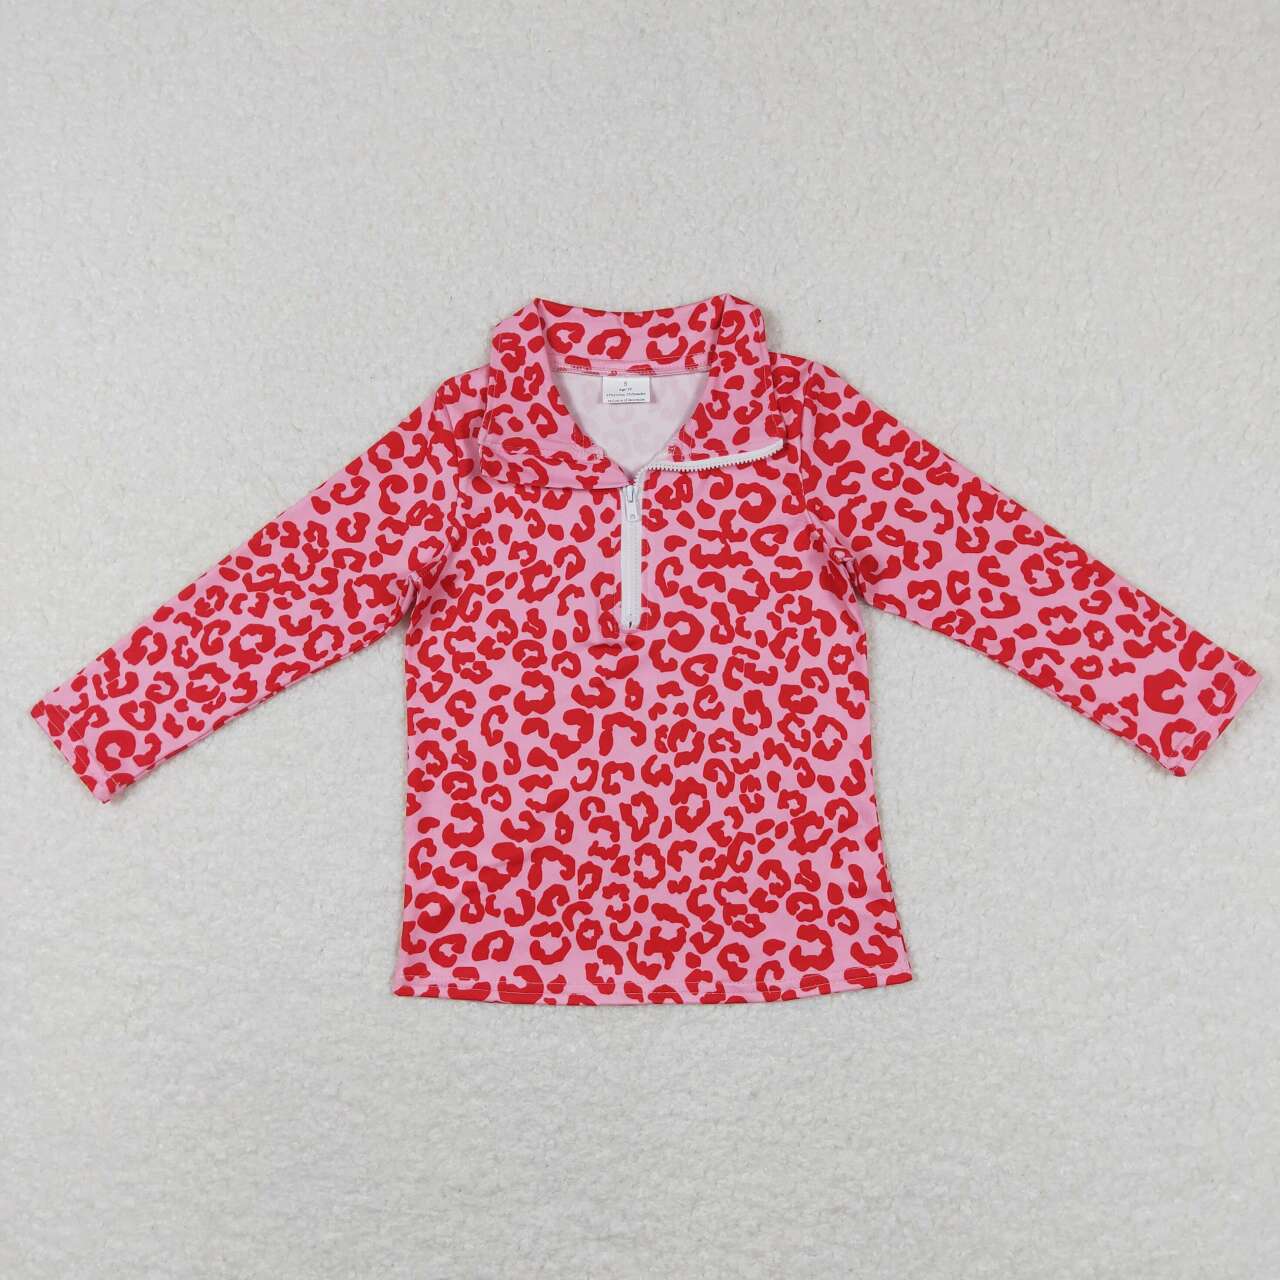 red leopard zip pullover top girls clothing